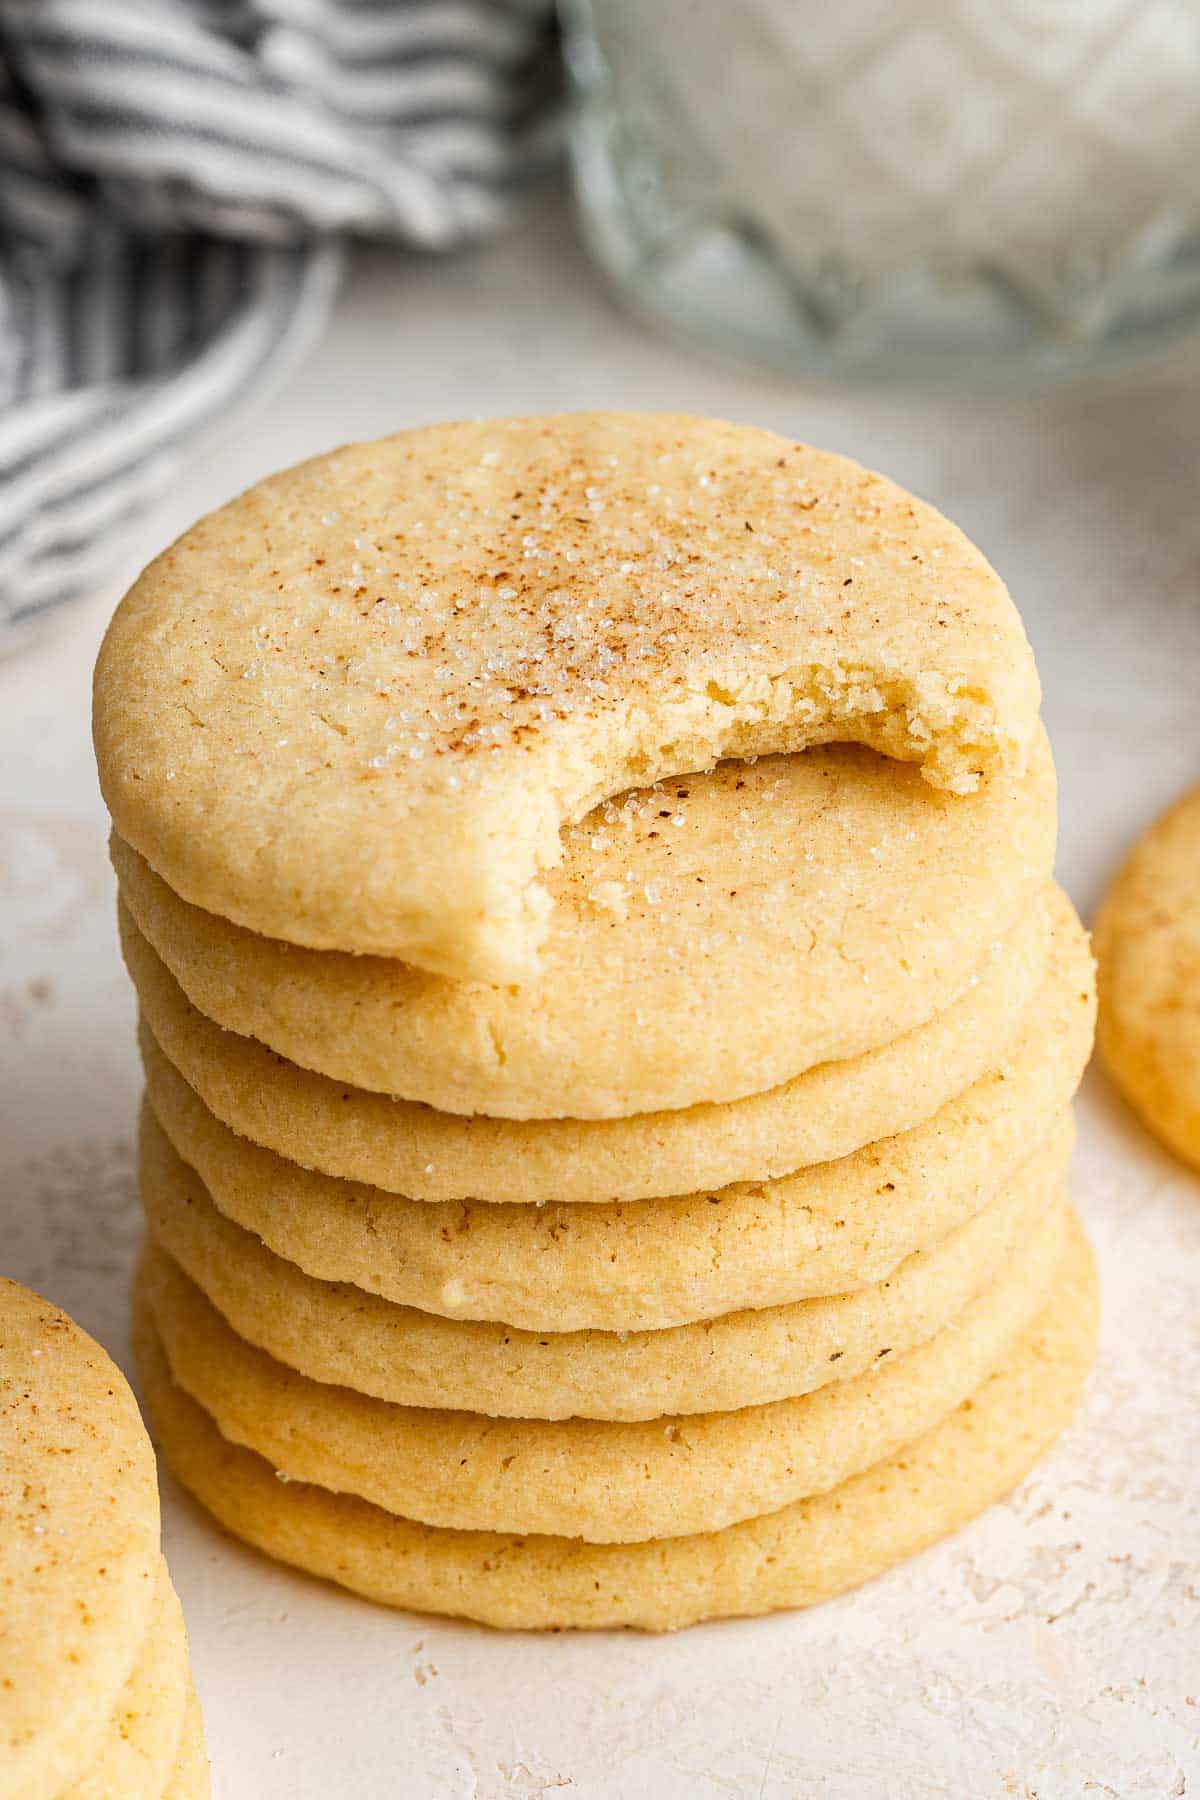 Stack of Southern tea cakes with top cookie missing a bite.